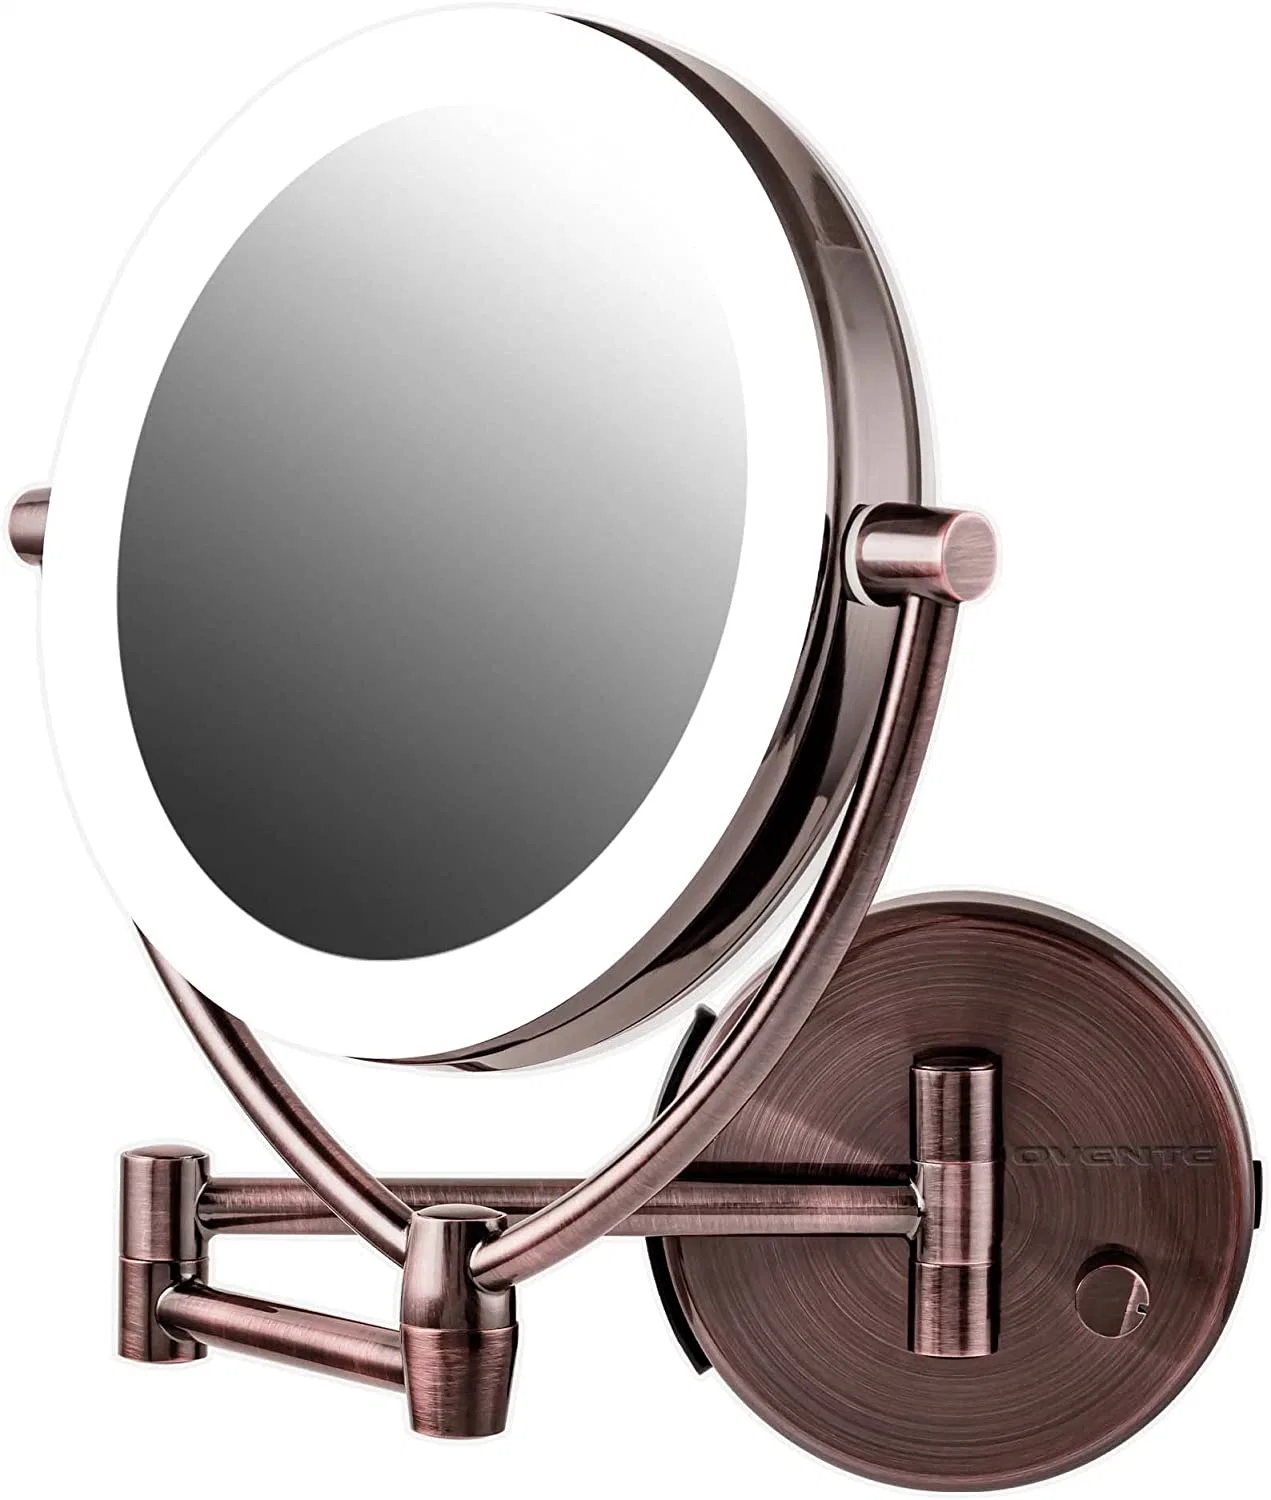 7.5" Lighted Wall Mount Makeup Mirror, 1X & 10X Magnifier, Spinning Double Sided Round LED Dimmer Switch, Extend, Retractable & Folding Arm, Battery USB Powered